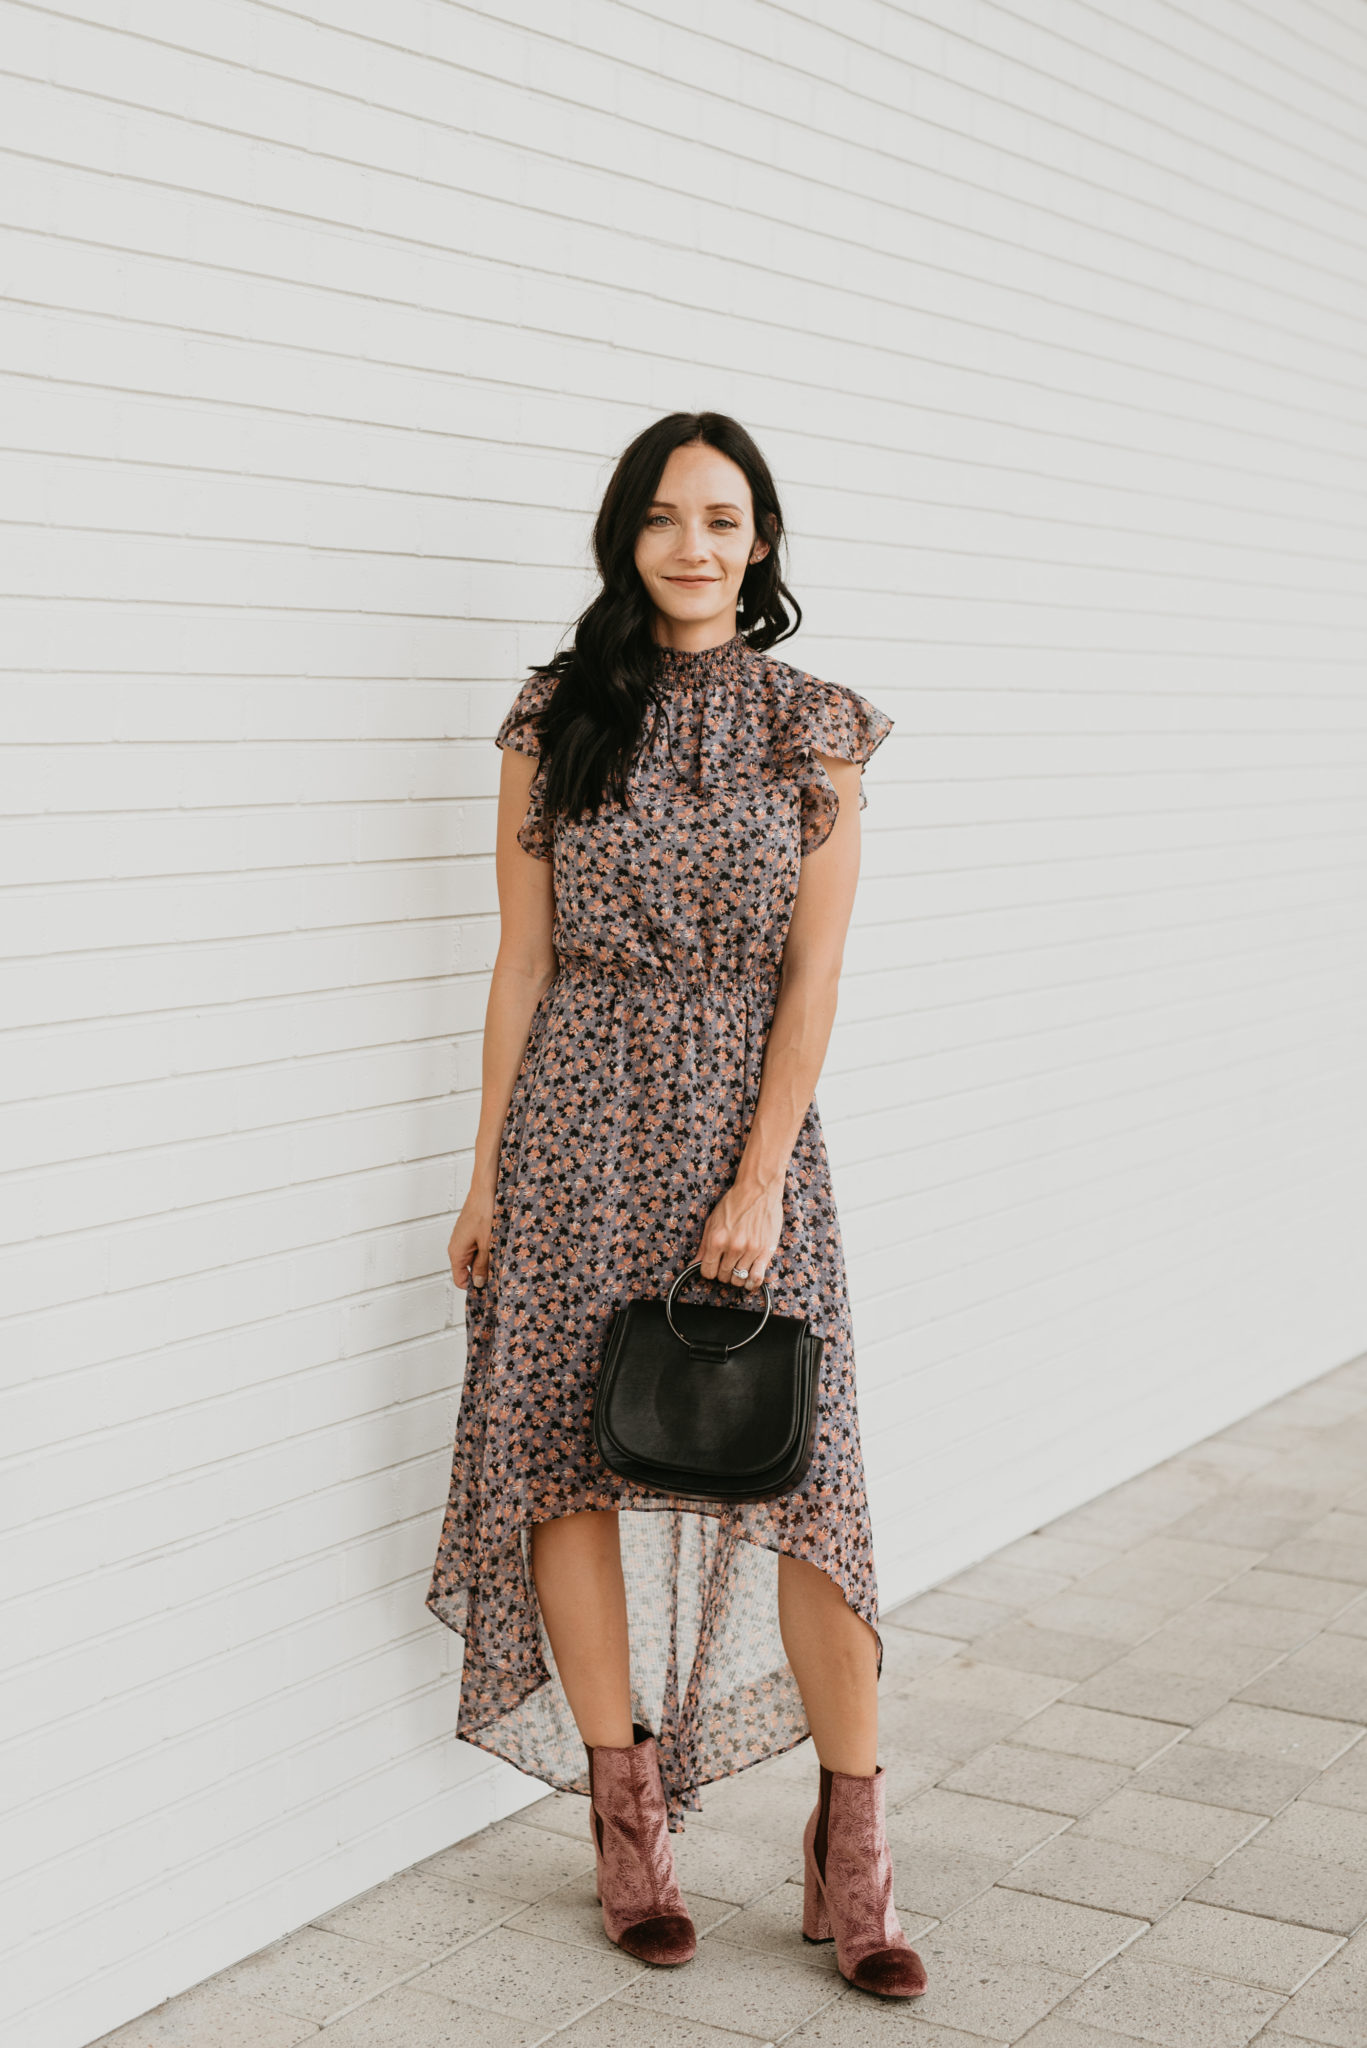 Macy's High Low Floral Dress styled by top Las Vegas fashion blog, Outfits & Outings